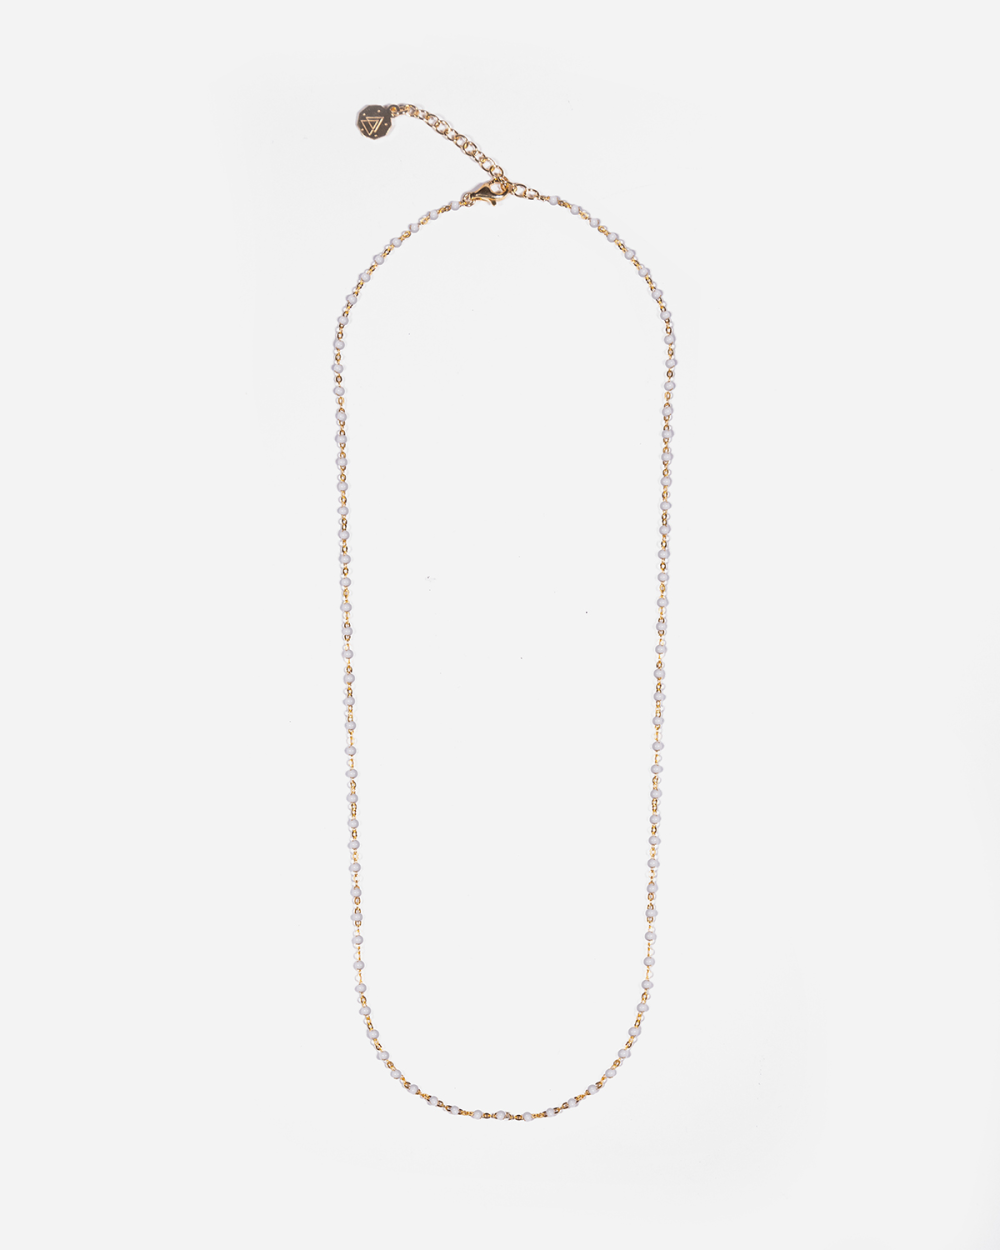 YELLOW GOLD NECKLACE WITH WHITE ENAMEL